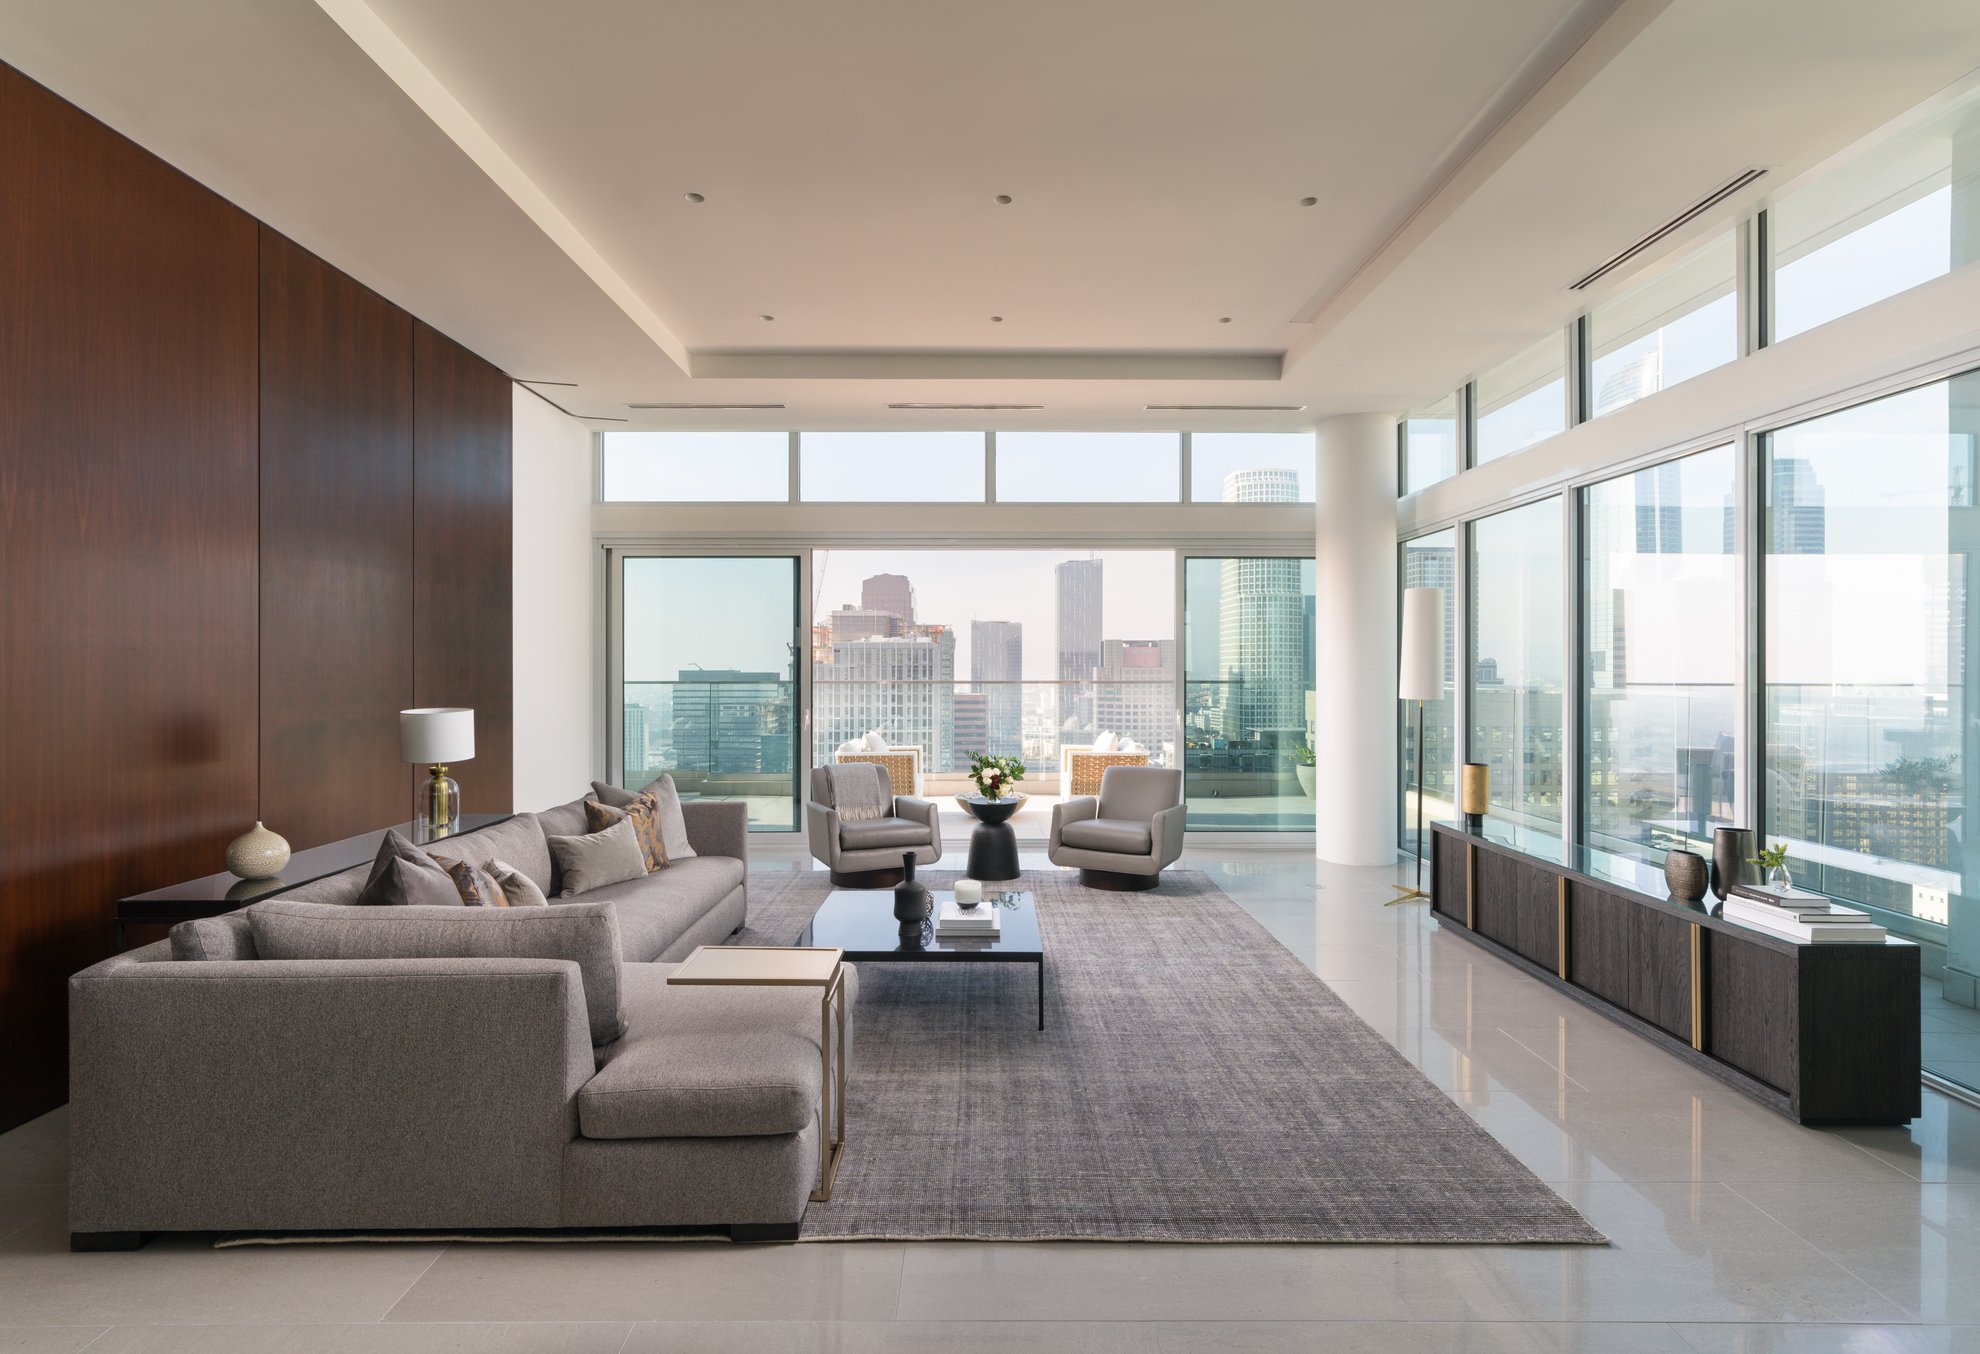 level south olive penthouse featuring spacious living room, open concept and dtla city view from balcony